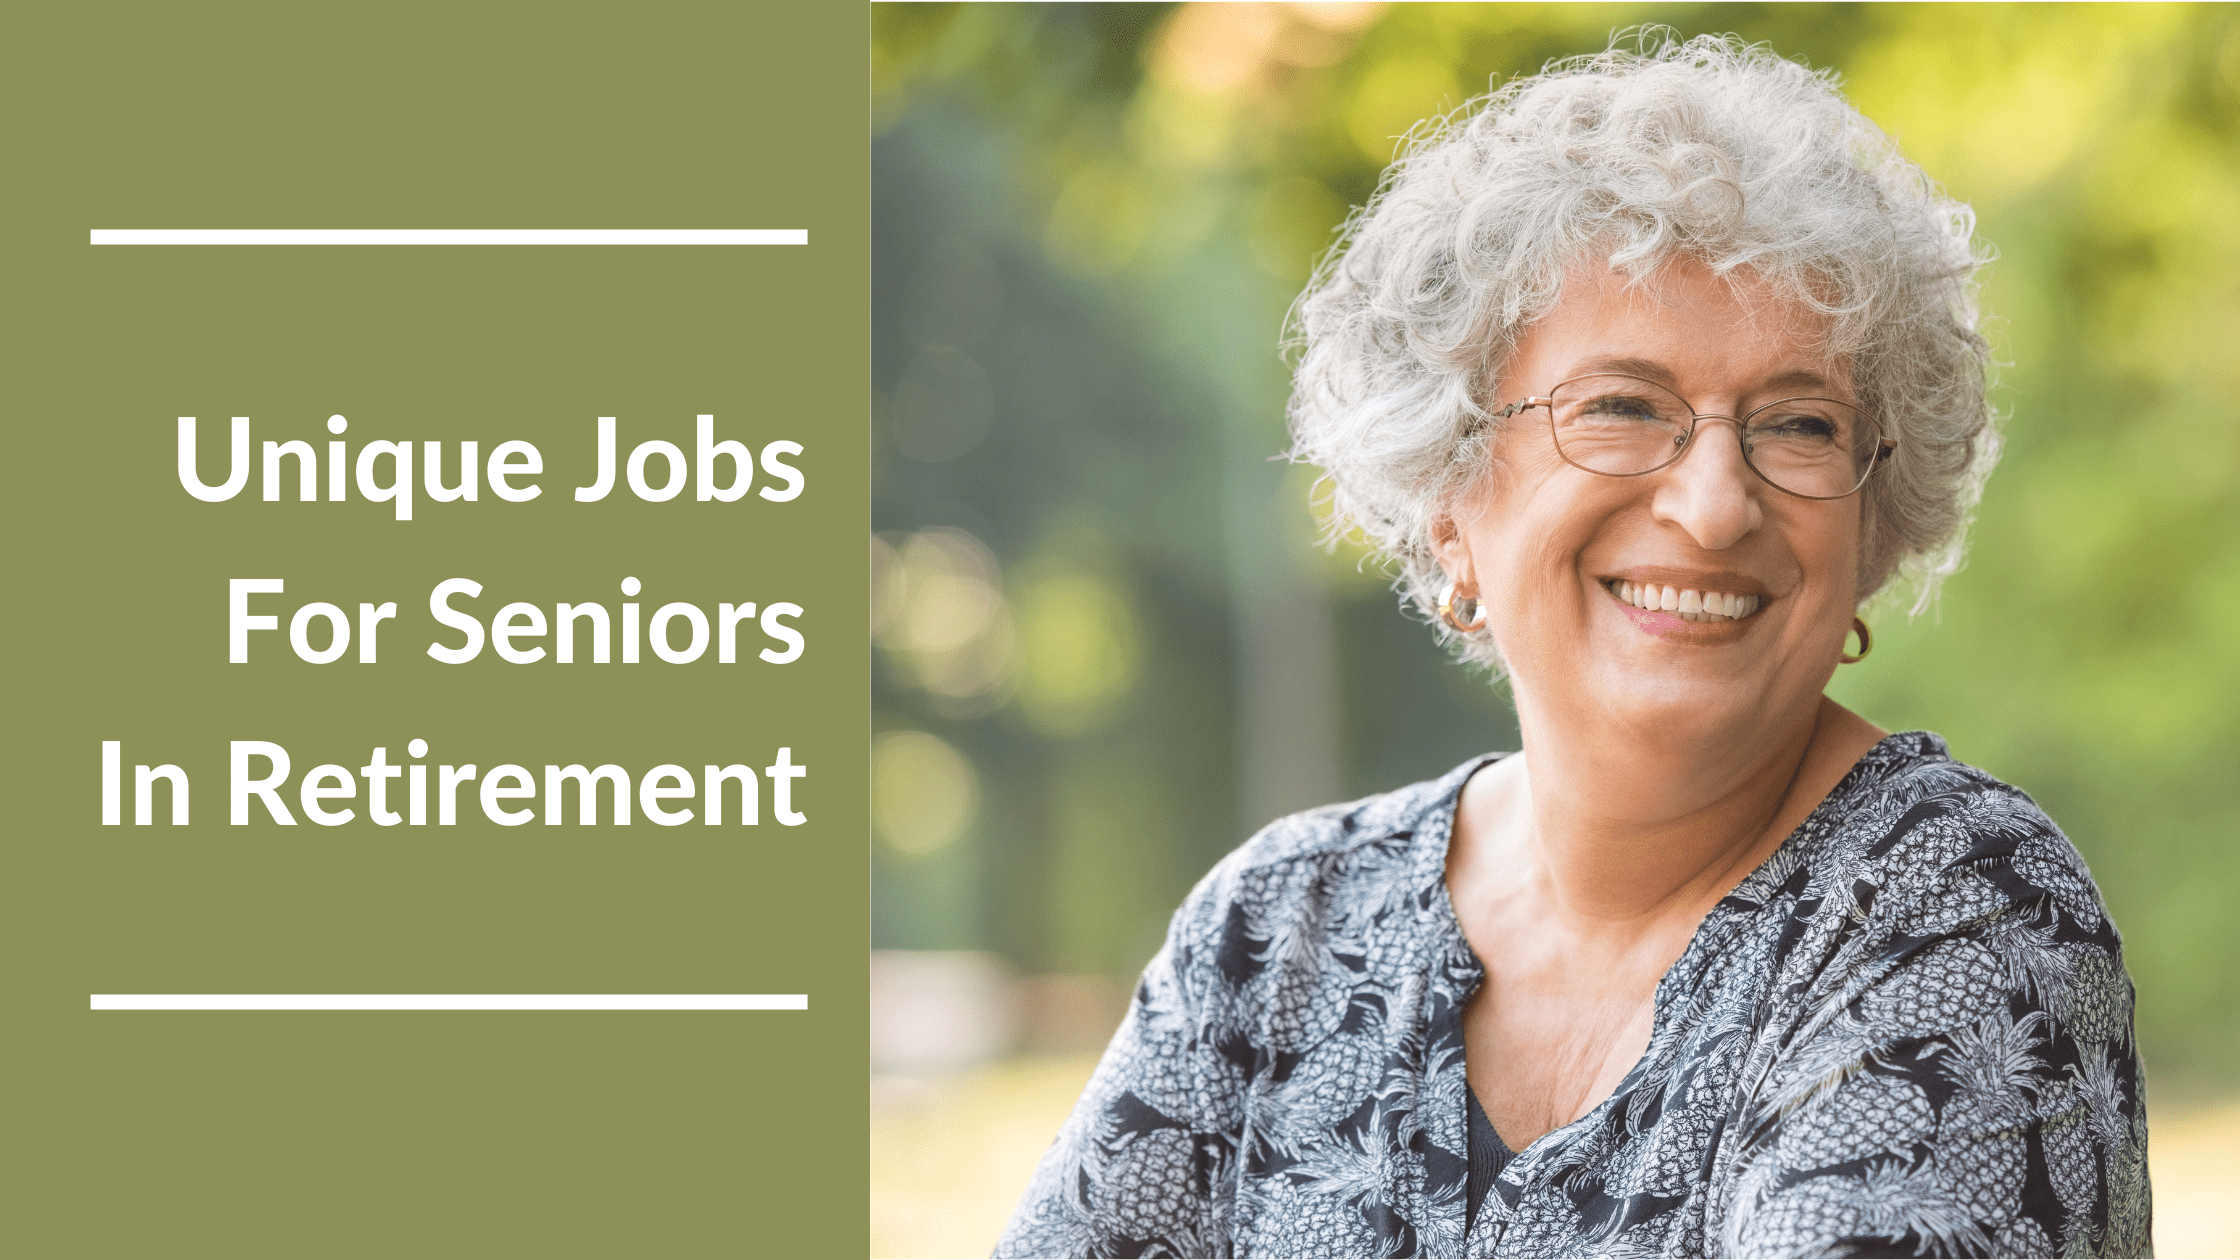 Jobs For Seniors Featured Image